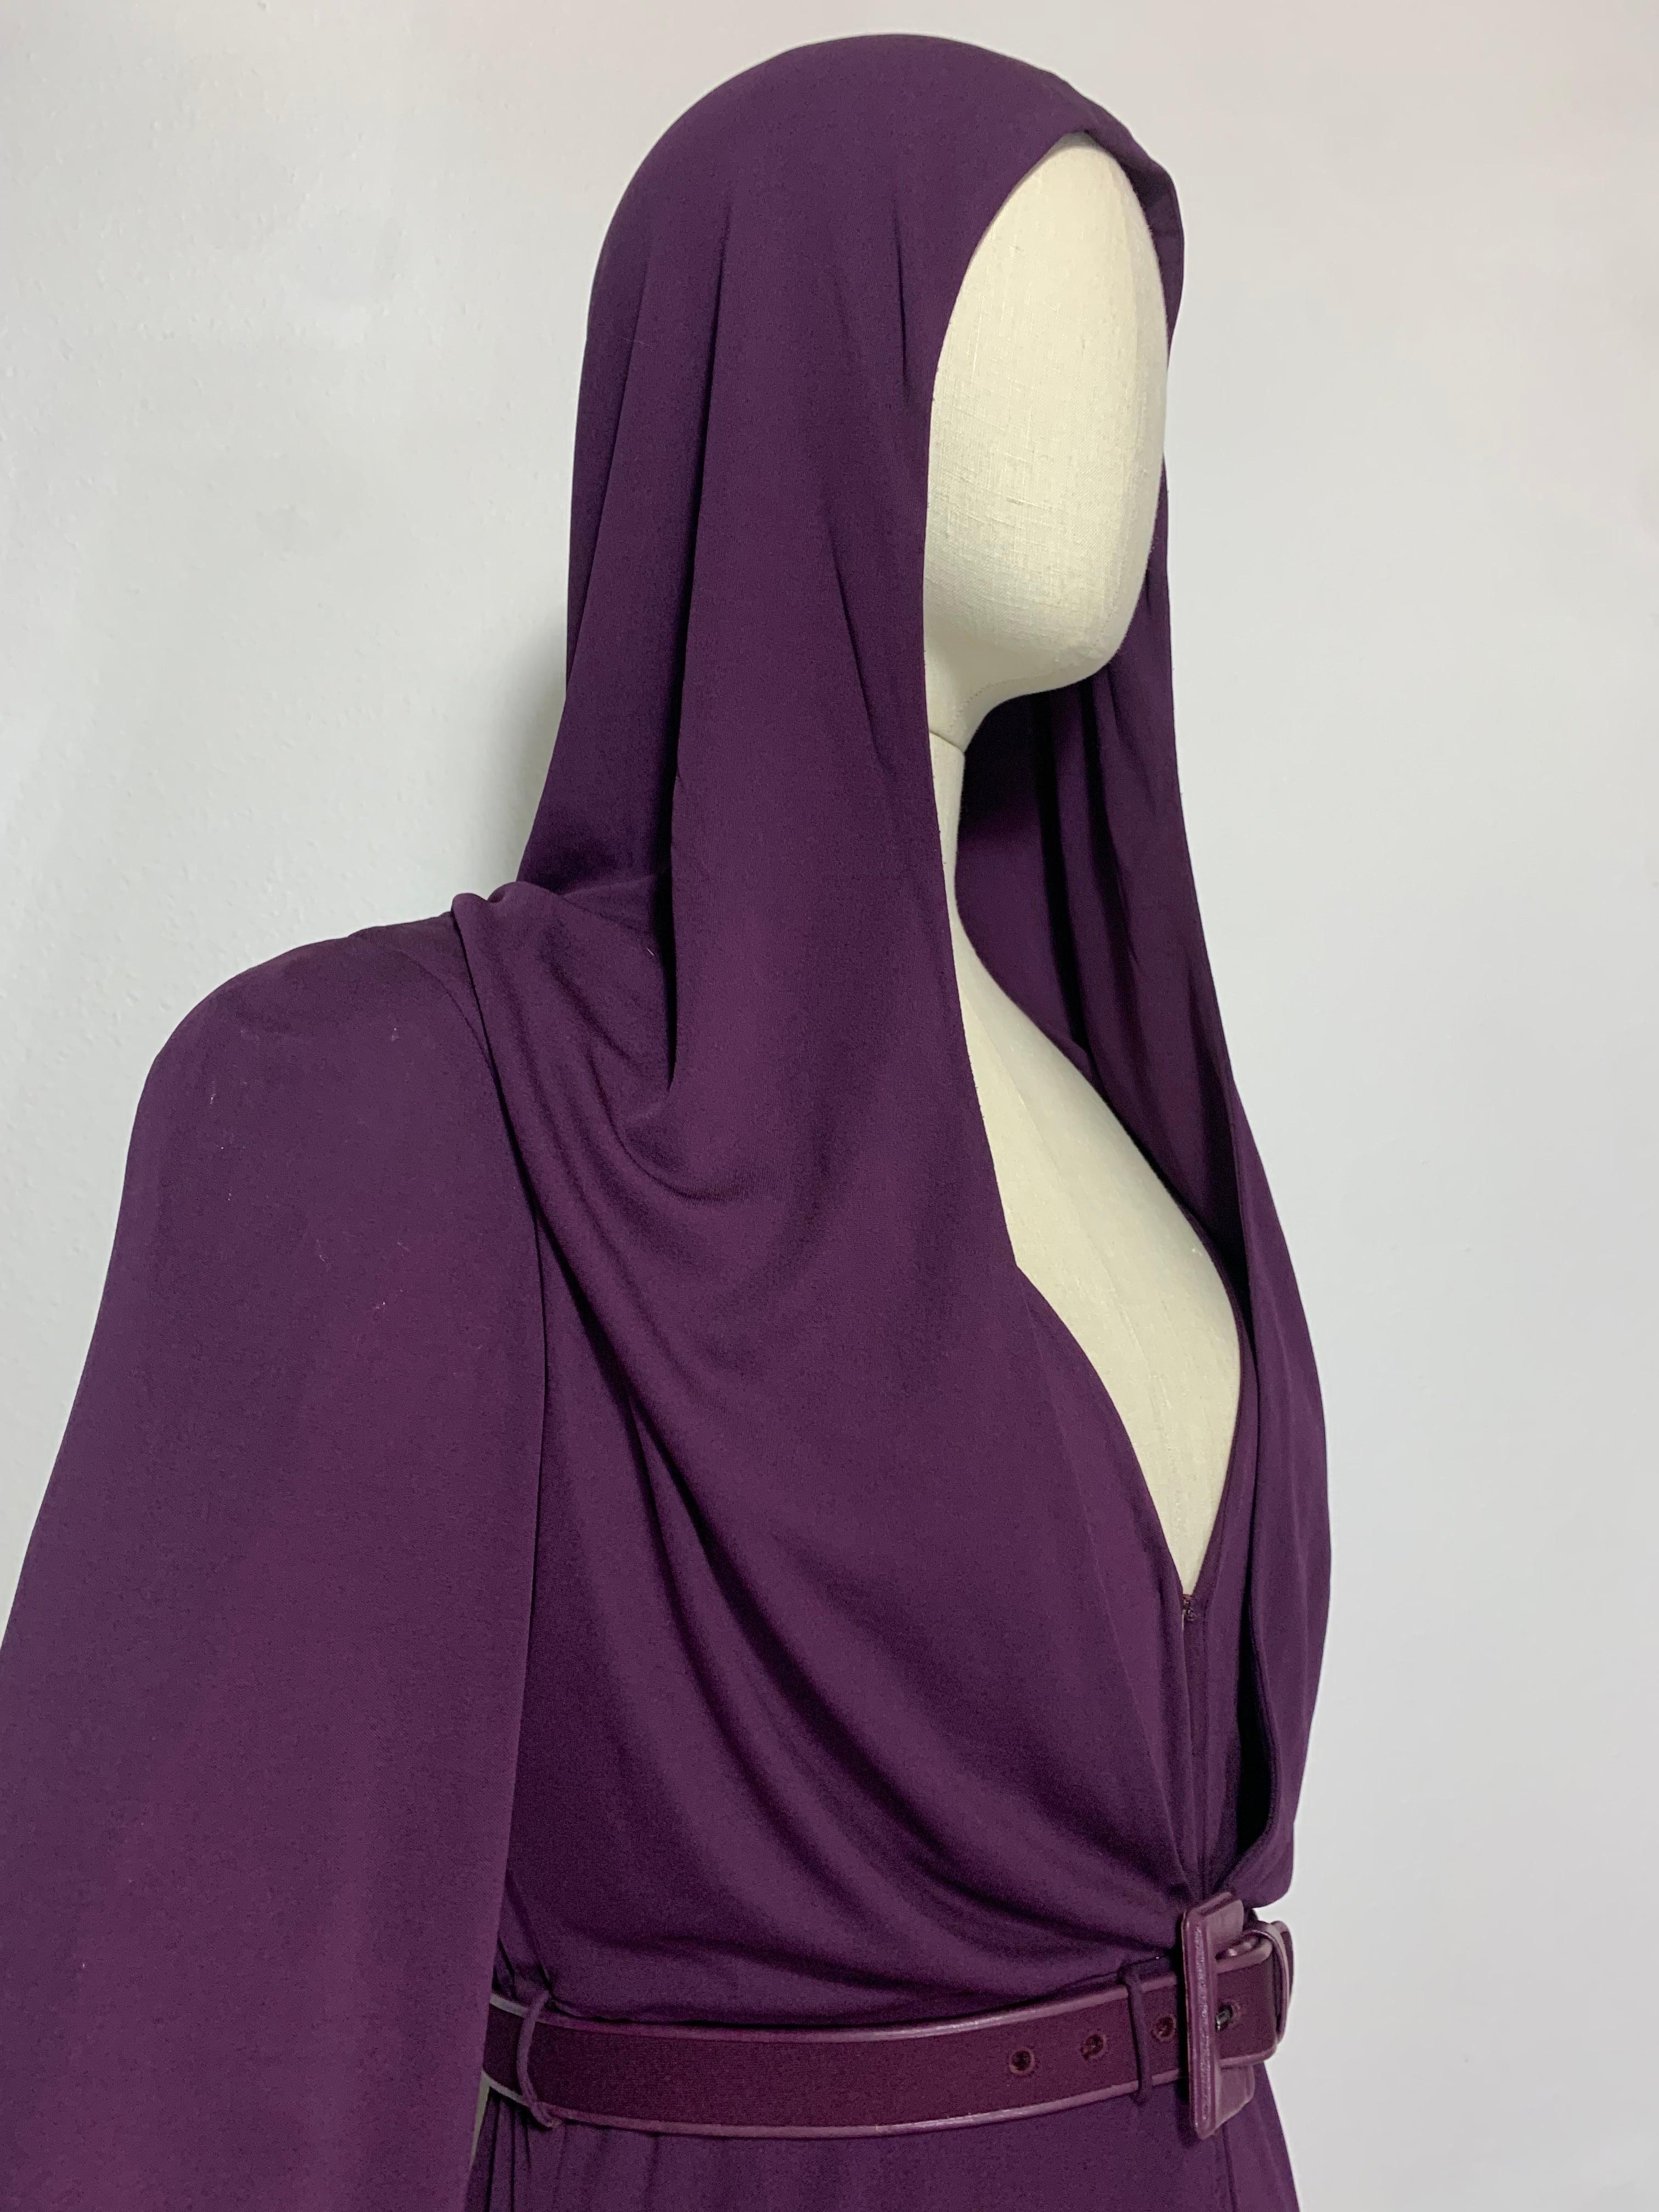 1975 James Galanos Dramatic Aubergine Jersey Maxi Gown w Fabulous Draped Hood For Sale 12